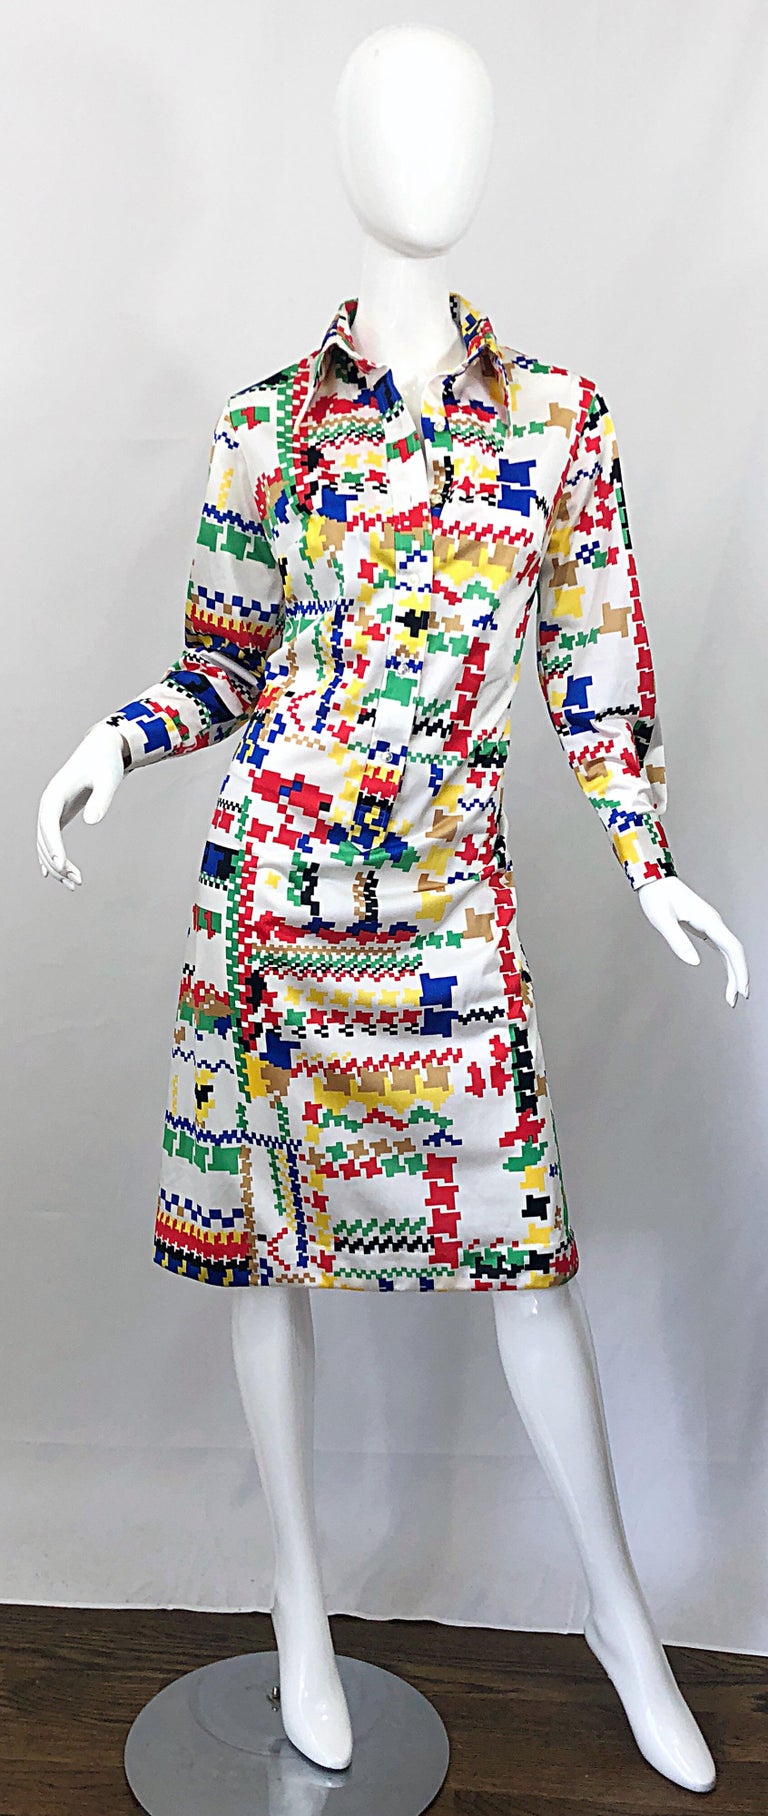 Amazing 1970s LANVIN colorful asymmetrical houndstooth print jersey shirt dress! Features signature 70s pointed collar with a sleek sheath fit with plenty of stretch. Buttons up the front and at each sleeve cuff. Vibrant colors of blue, green, red,